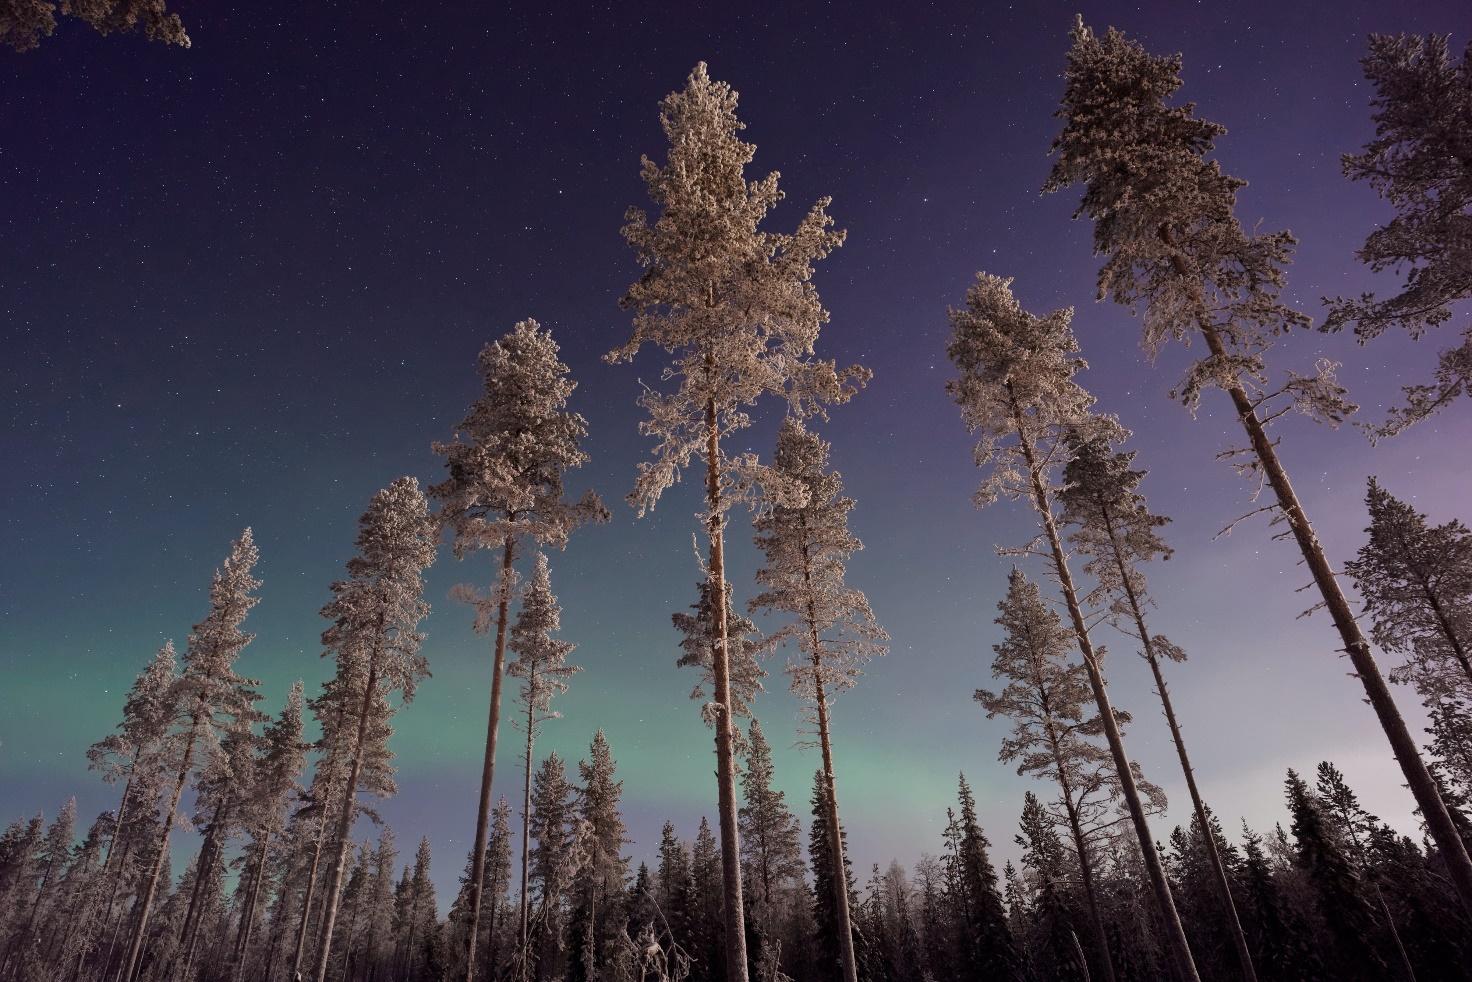 Northern lights in Finland.